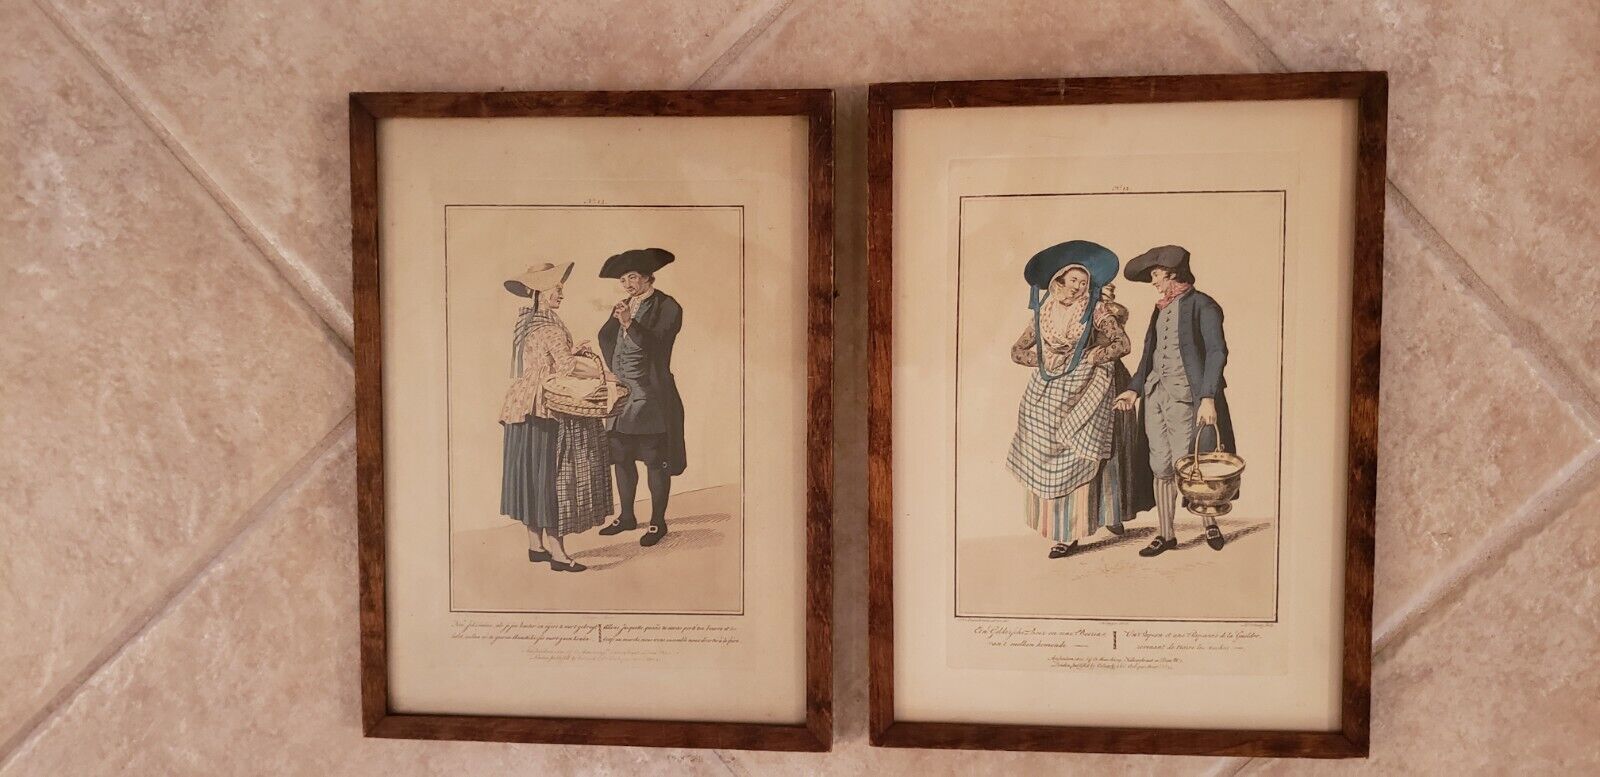 2 Maaskamp Hand Colored Prints 1811  Plates 12-13  Early 19th Century Costumes